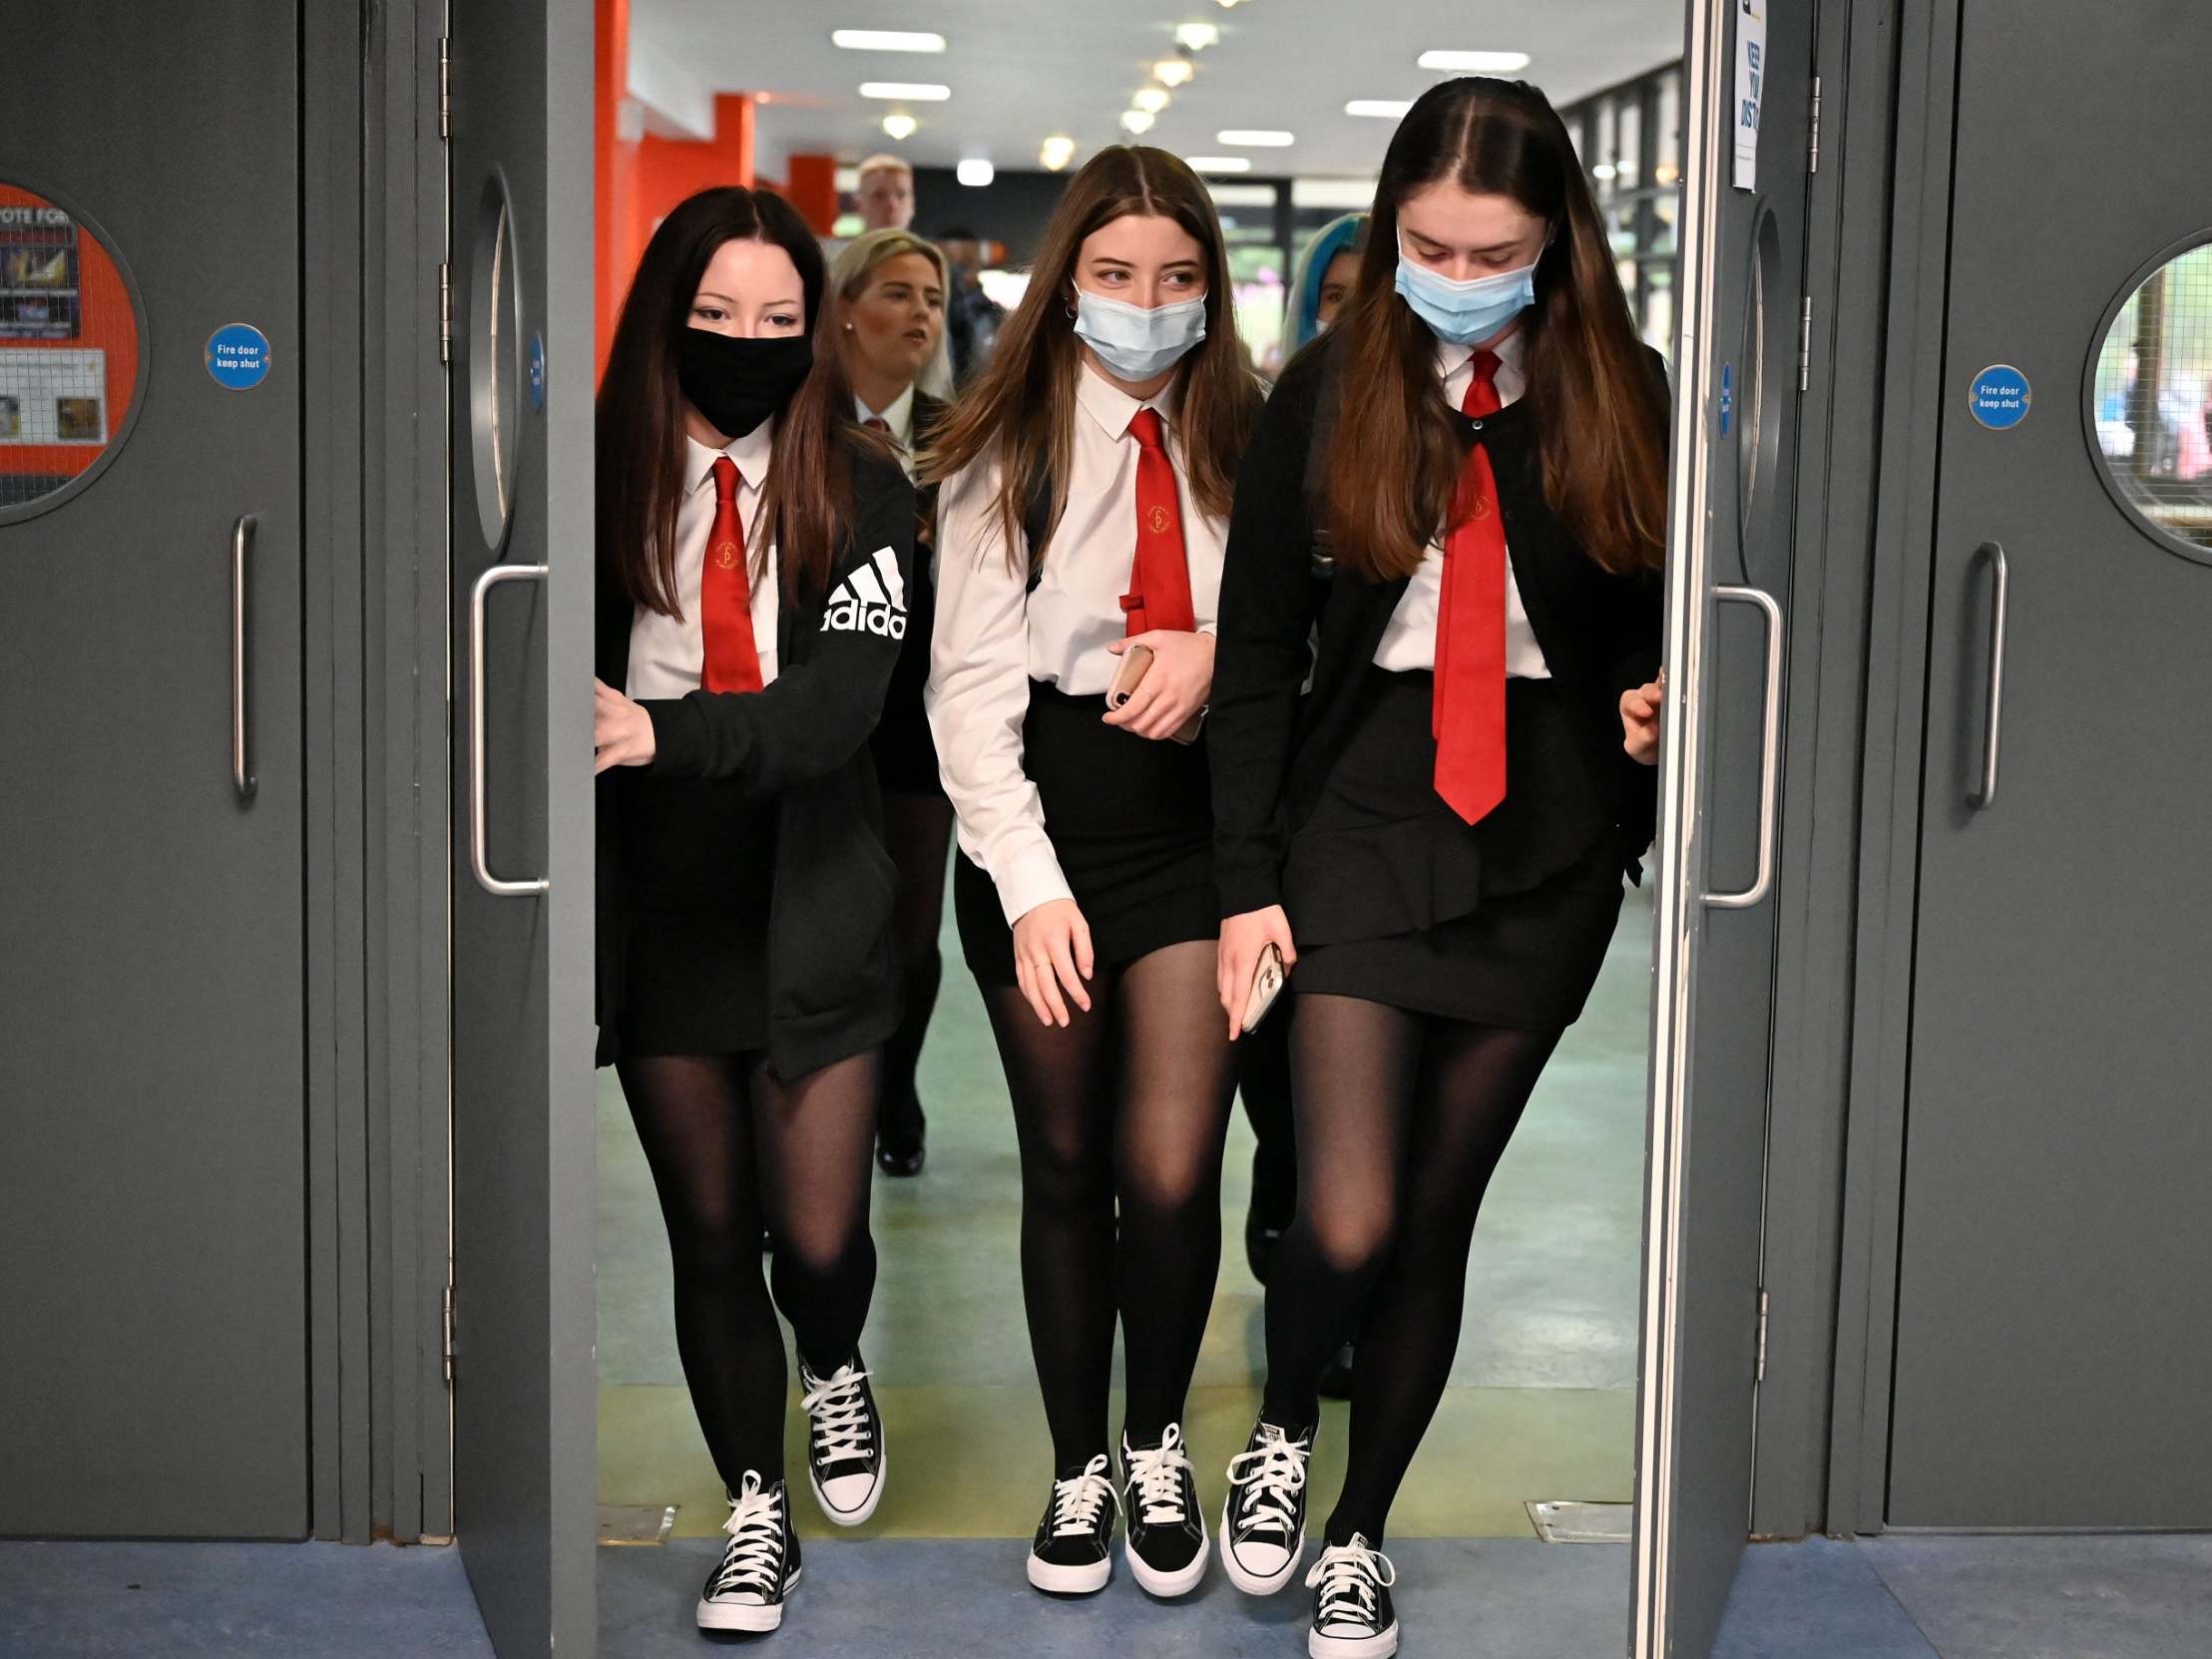 Masks will be required when moving around corridors and spaces where social distancing cannot be guaranteed